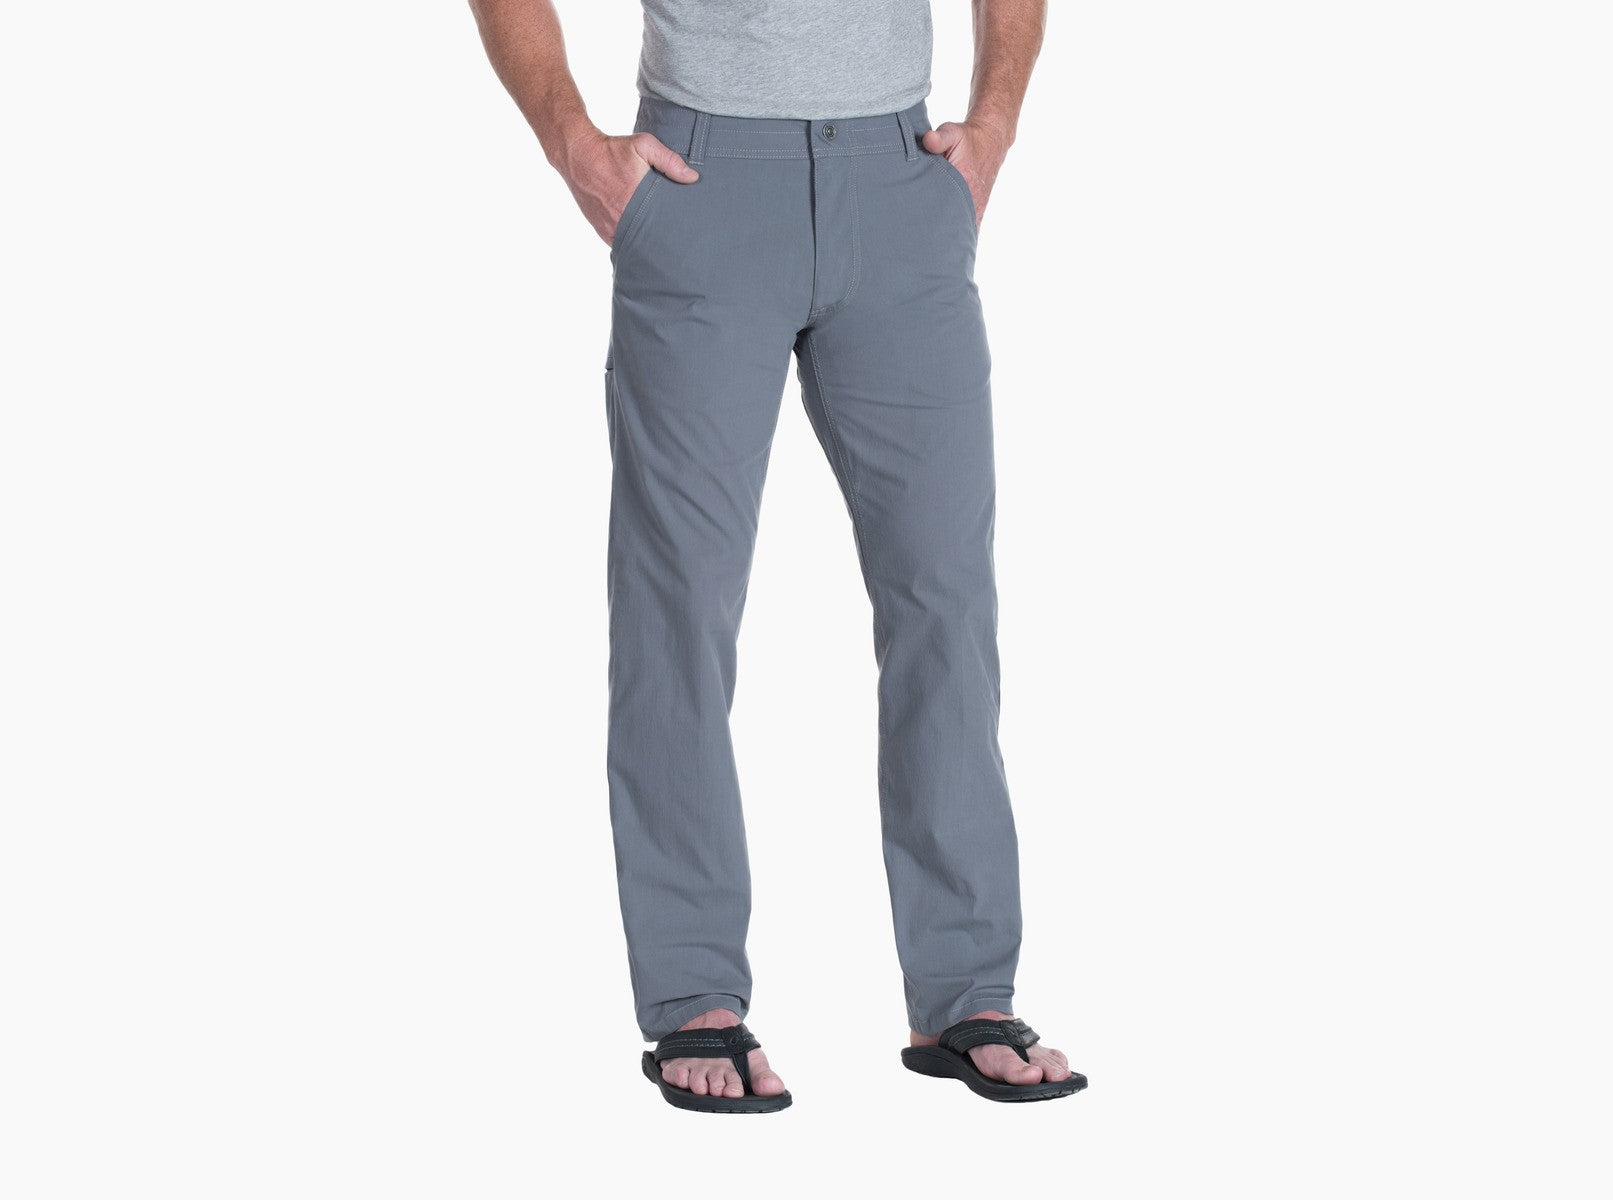 Men's Pants Tagged Kuhl - Outdoors Oriented